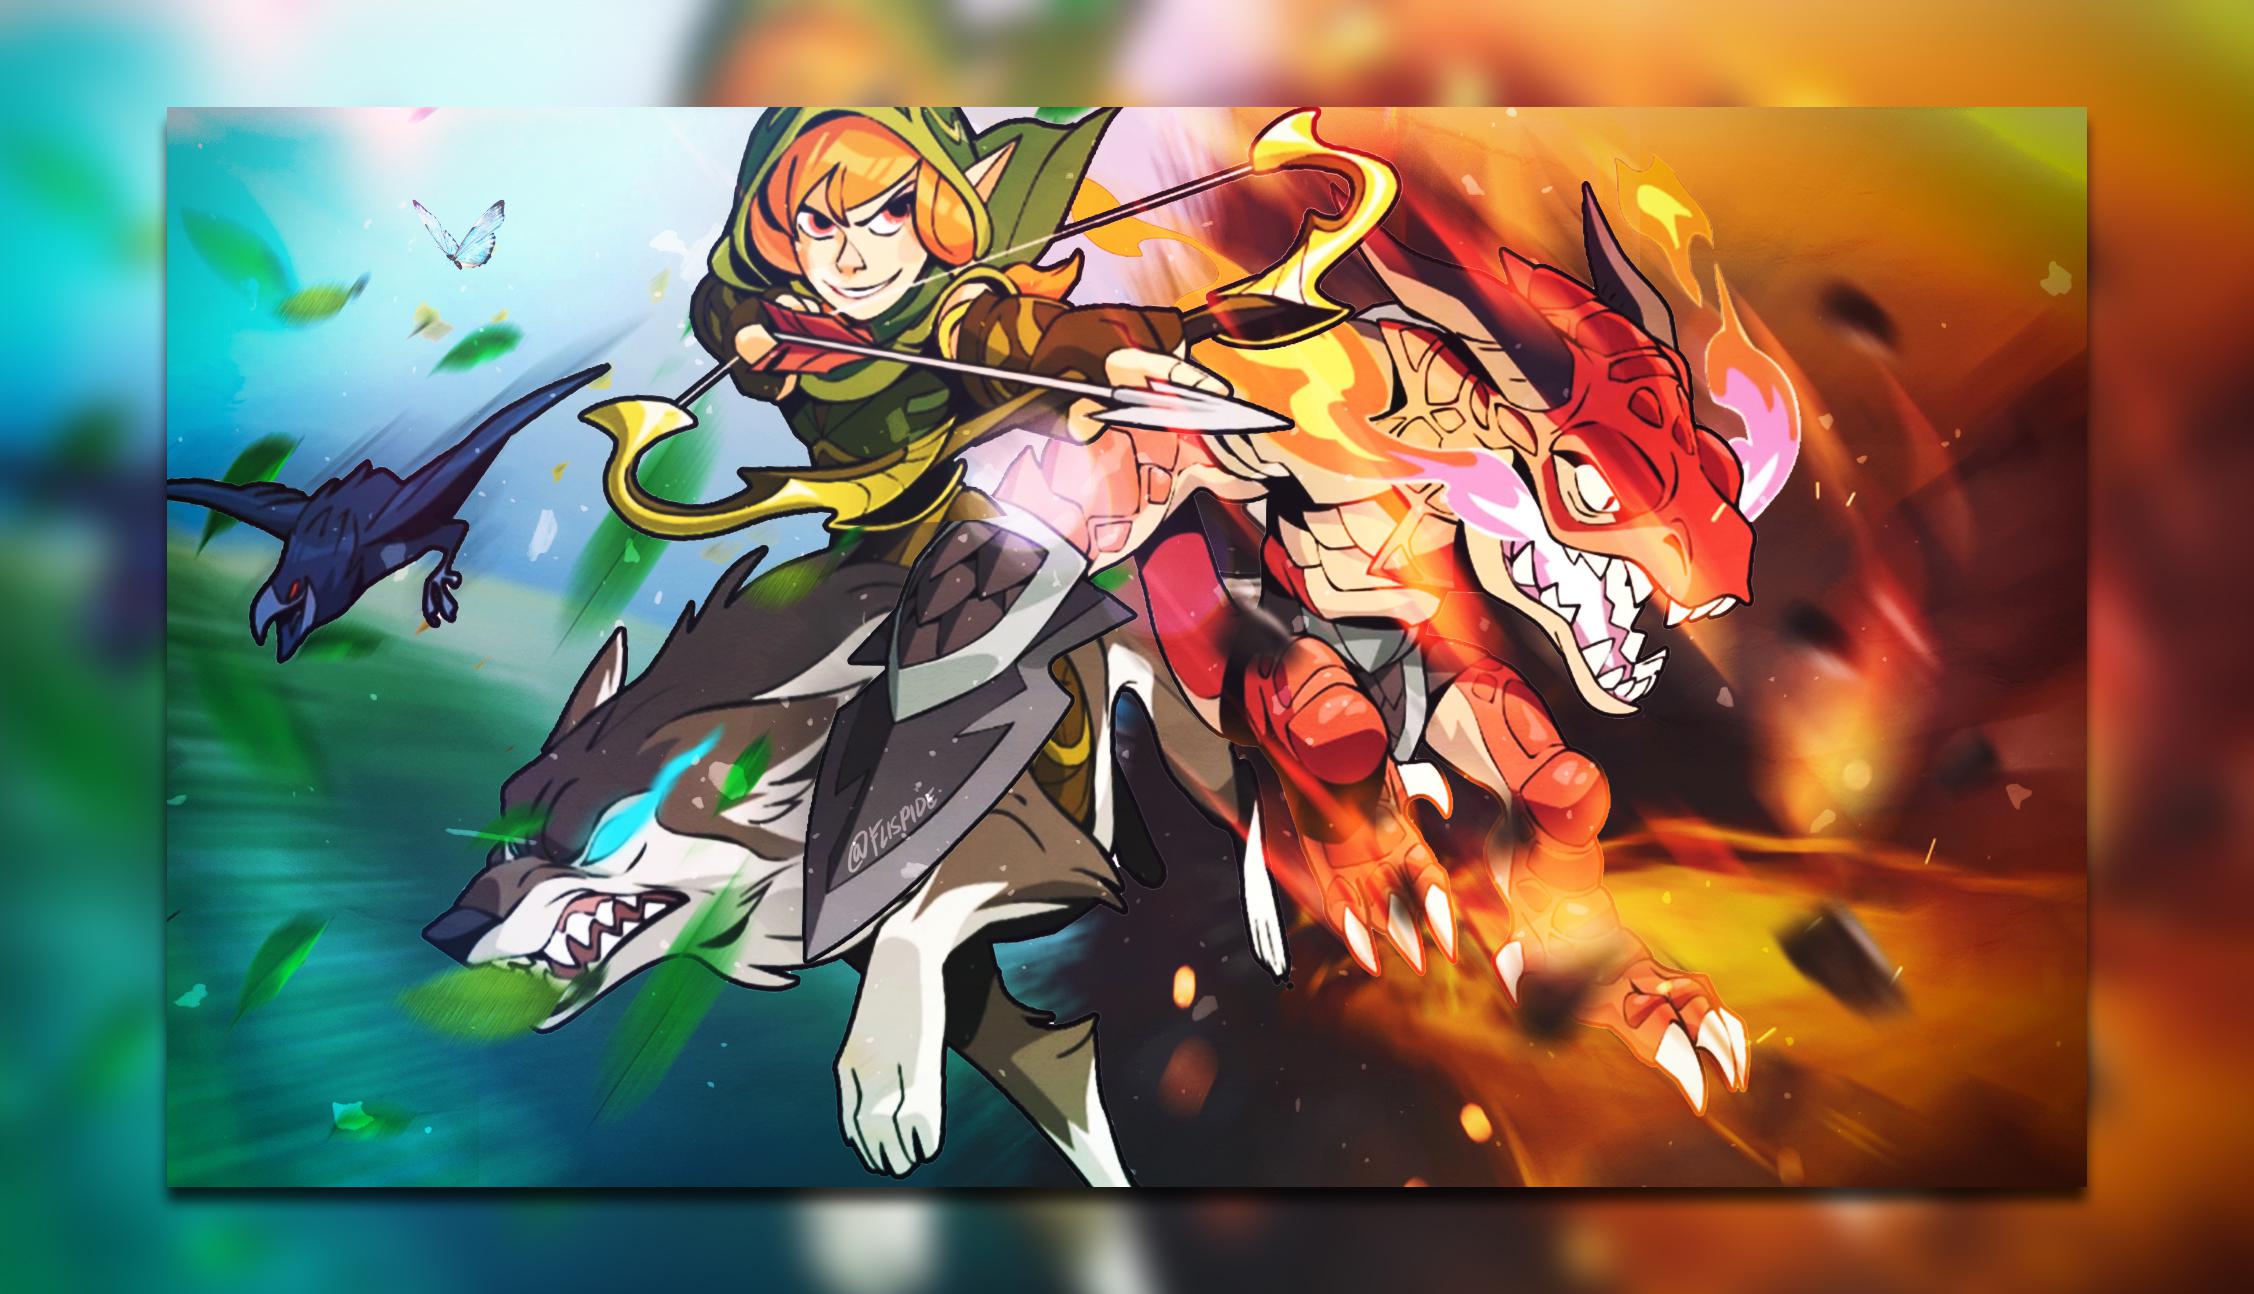 Ragnir / Ember Wallpaper (DOWNLOAD IN COMMENTS): Brawlhalla